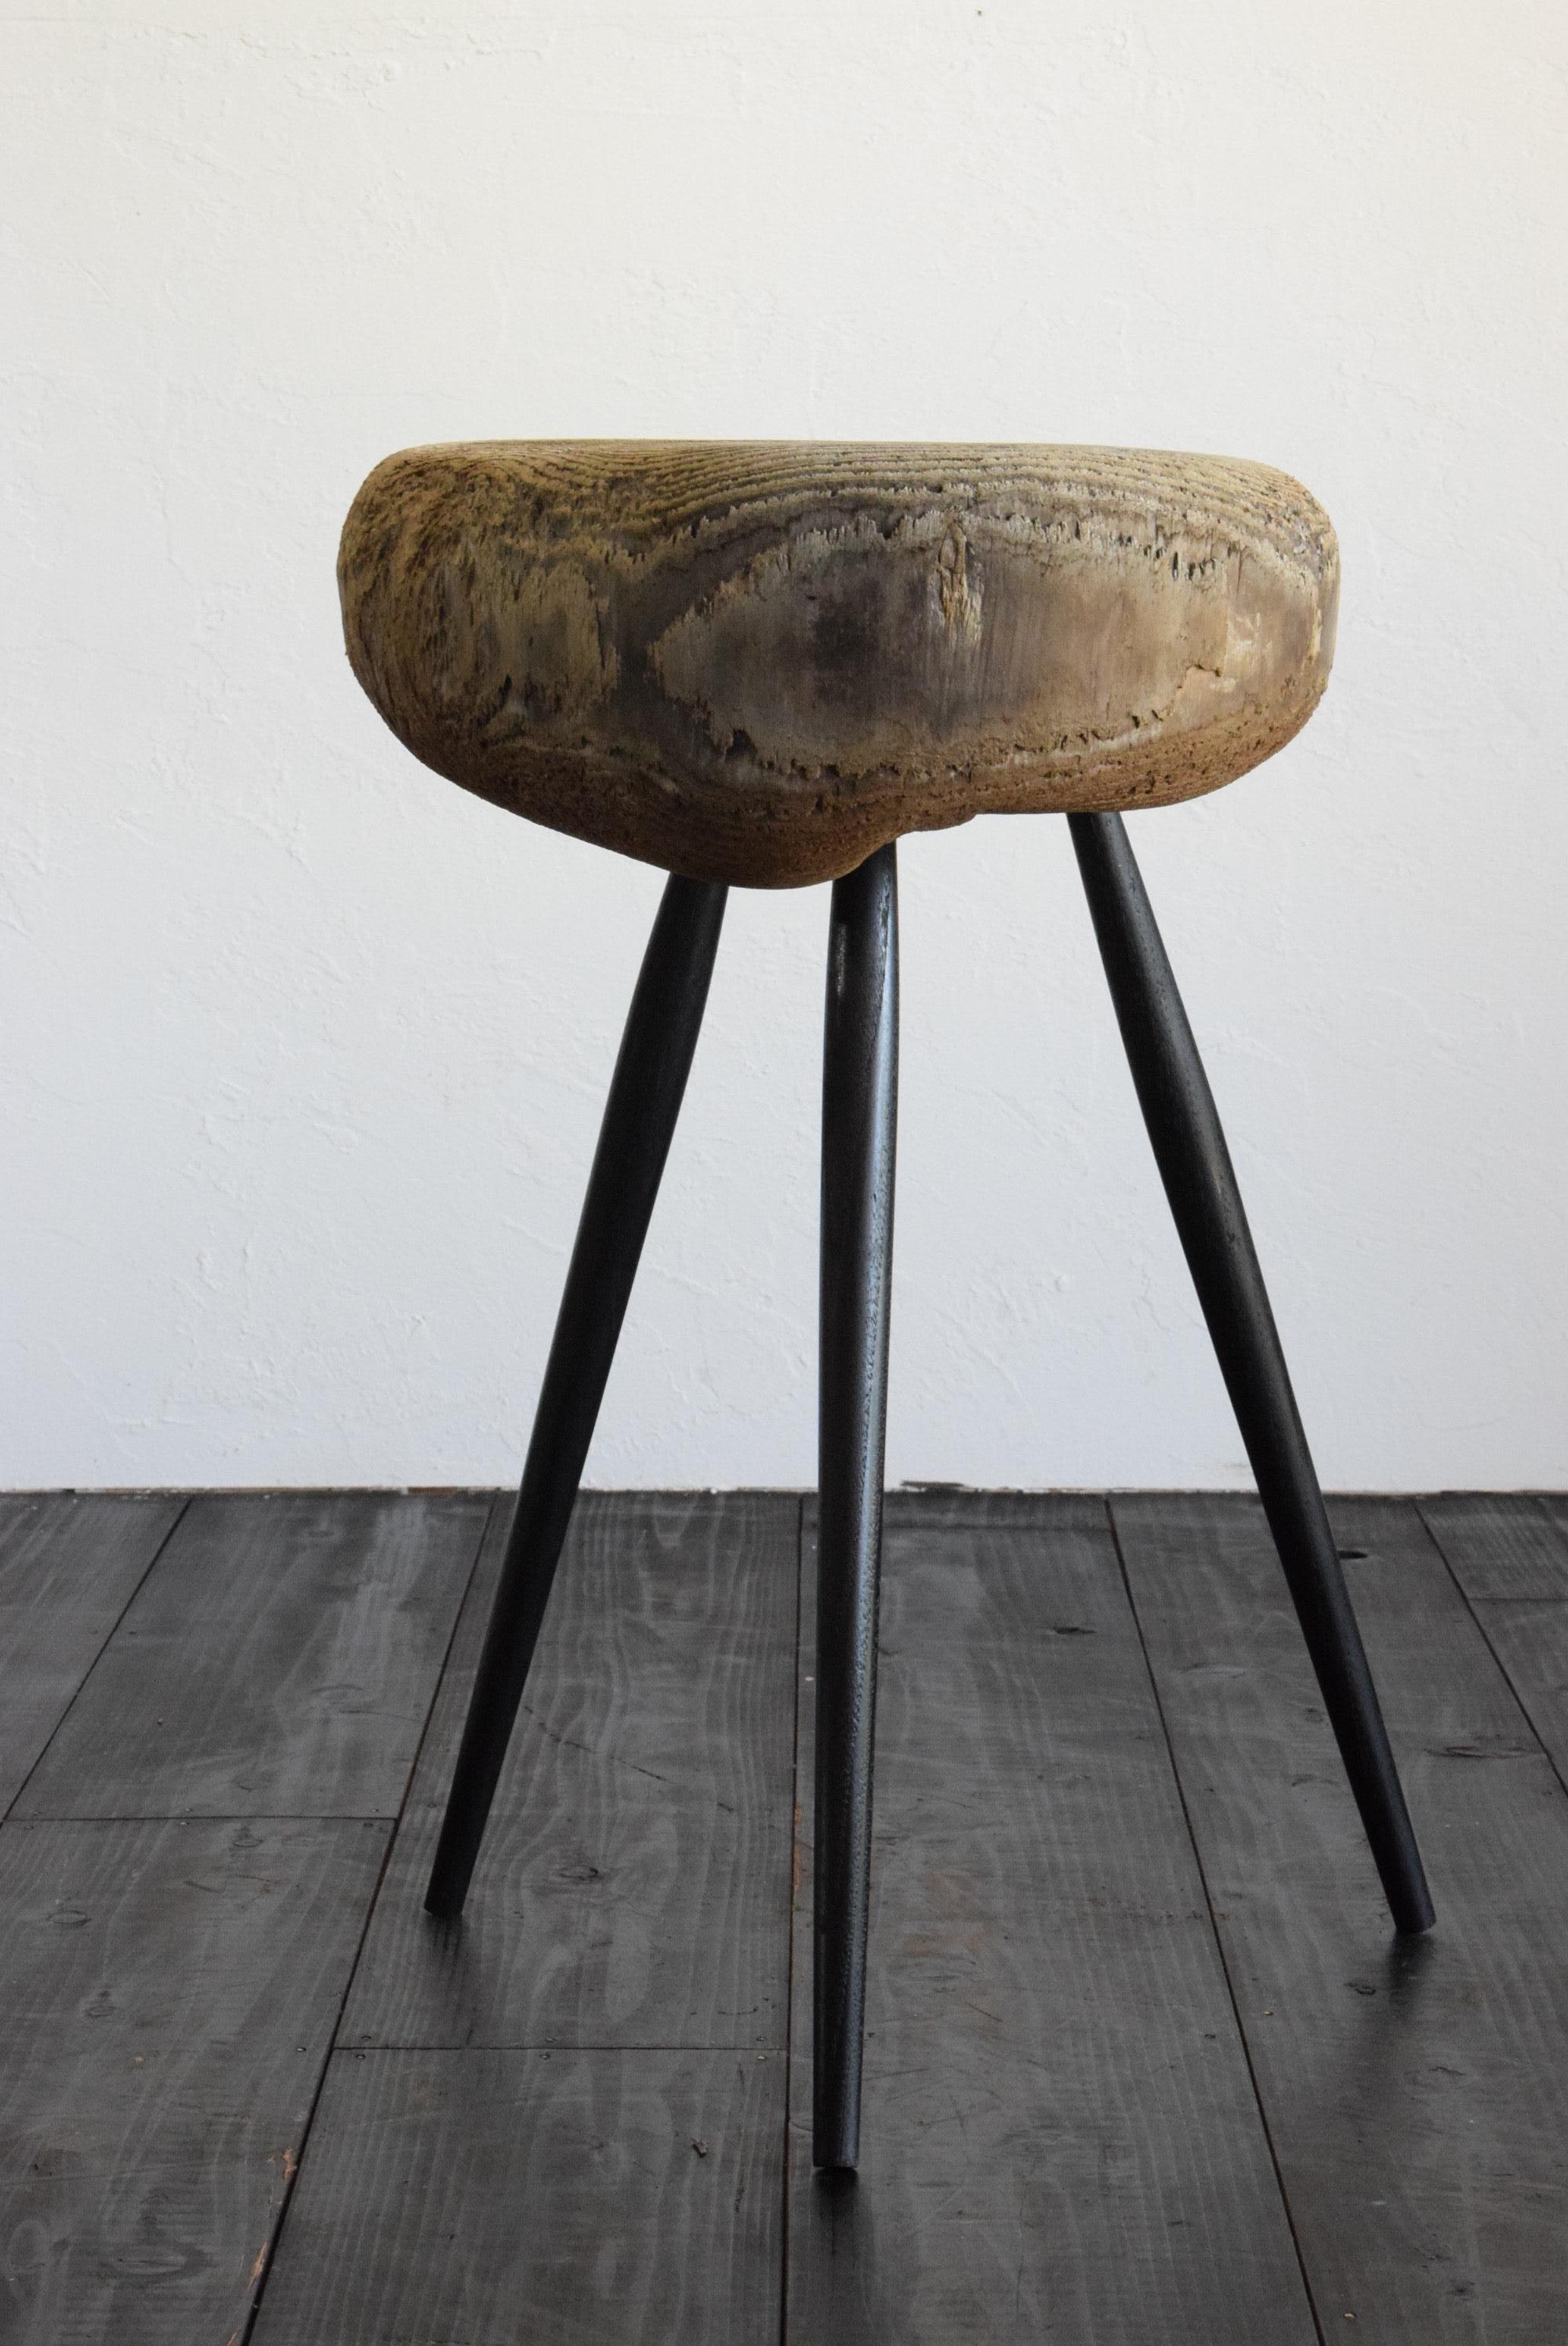 It's a table made from an old block of wood.  The design of the legs is three legs with delicate lines and a black luster like lacquer.

It has a height that can be used as a table or as a flower stand.

Weight: 5 kg.